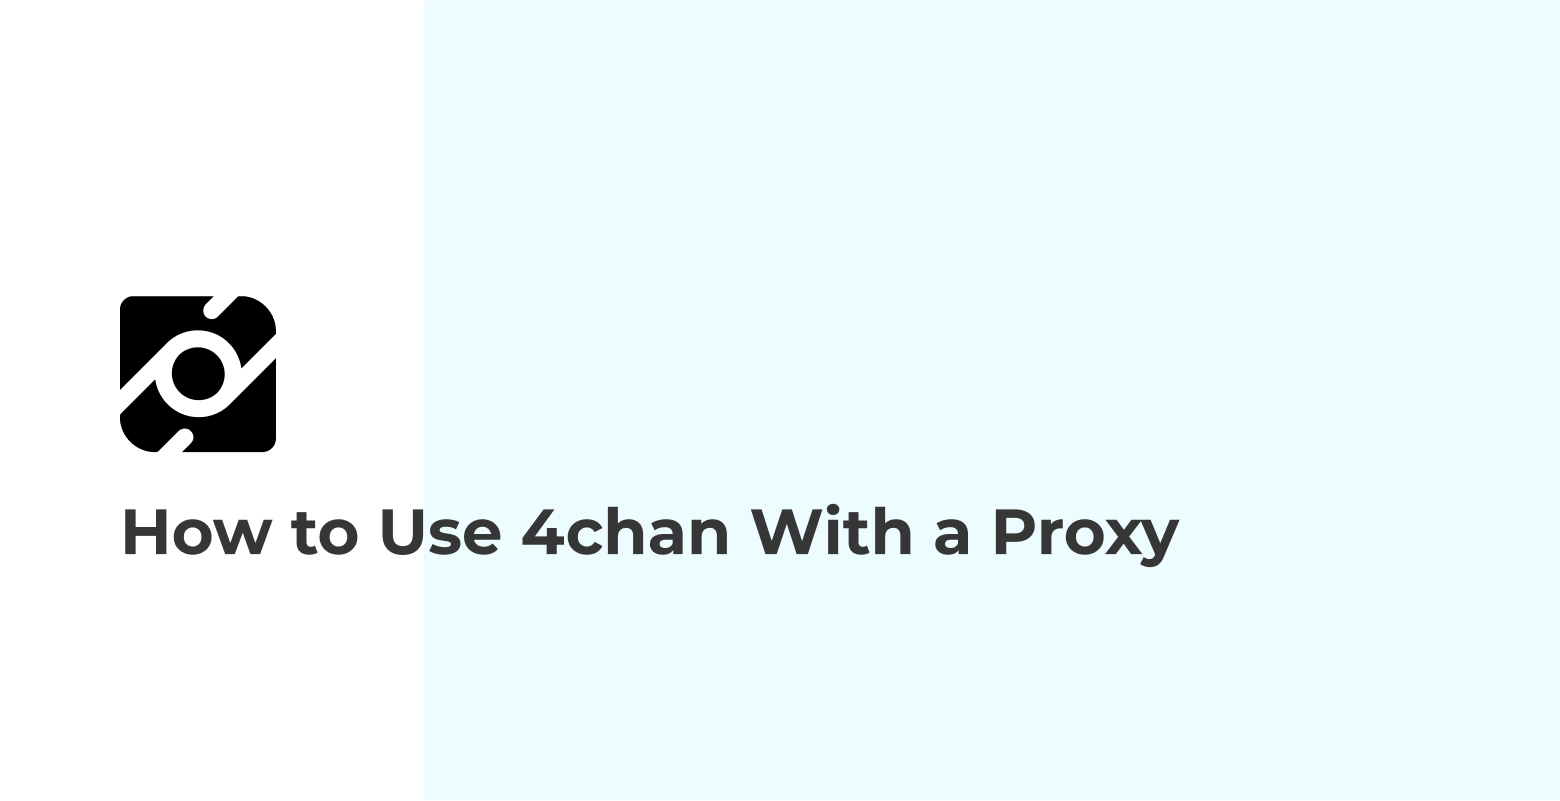 How to Use 4chan With a Proxy